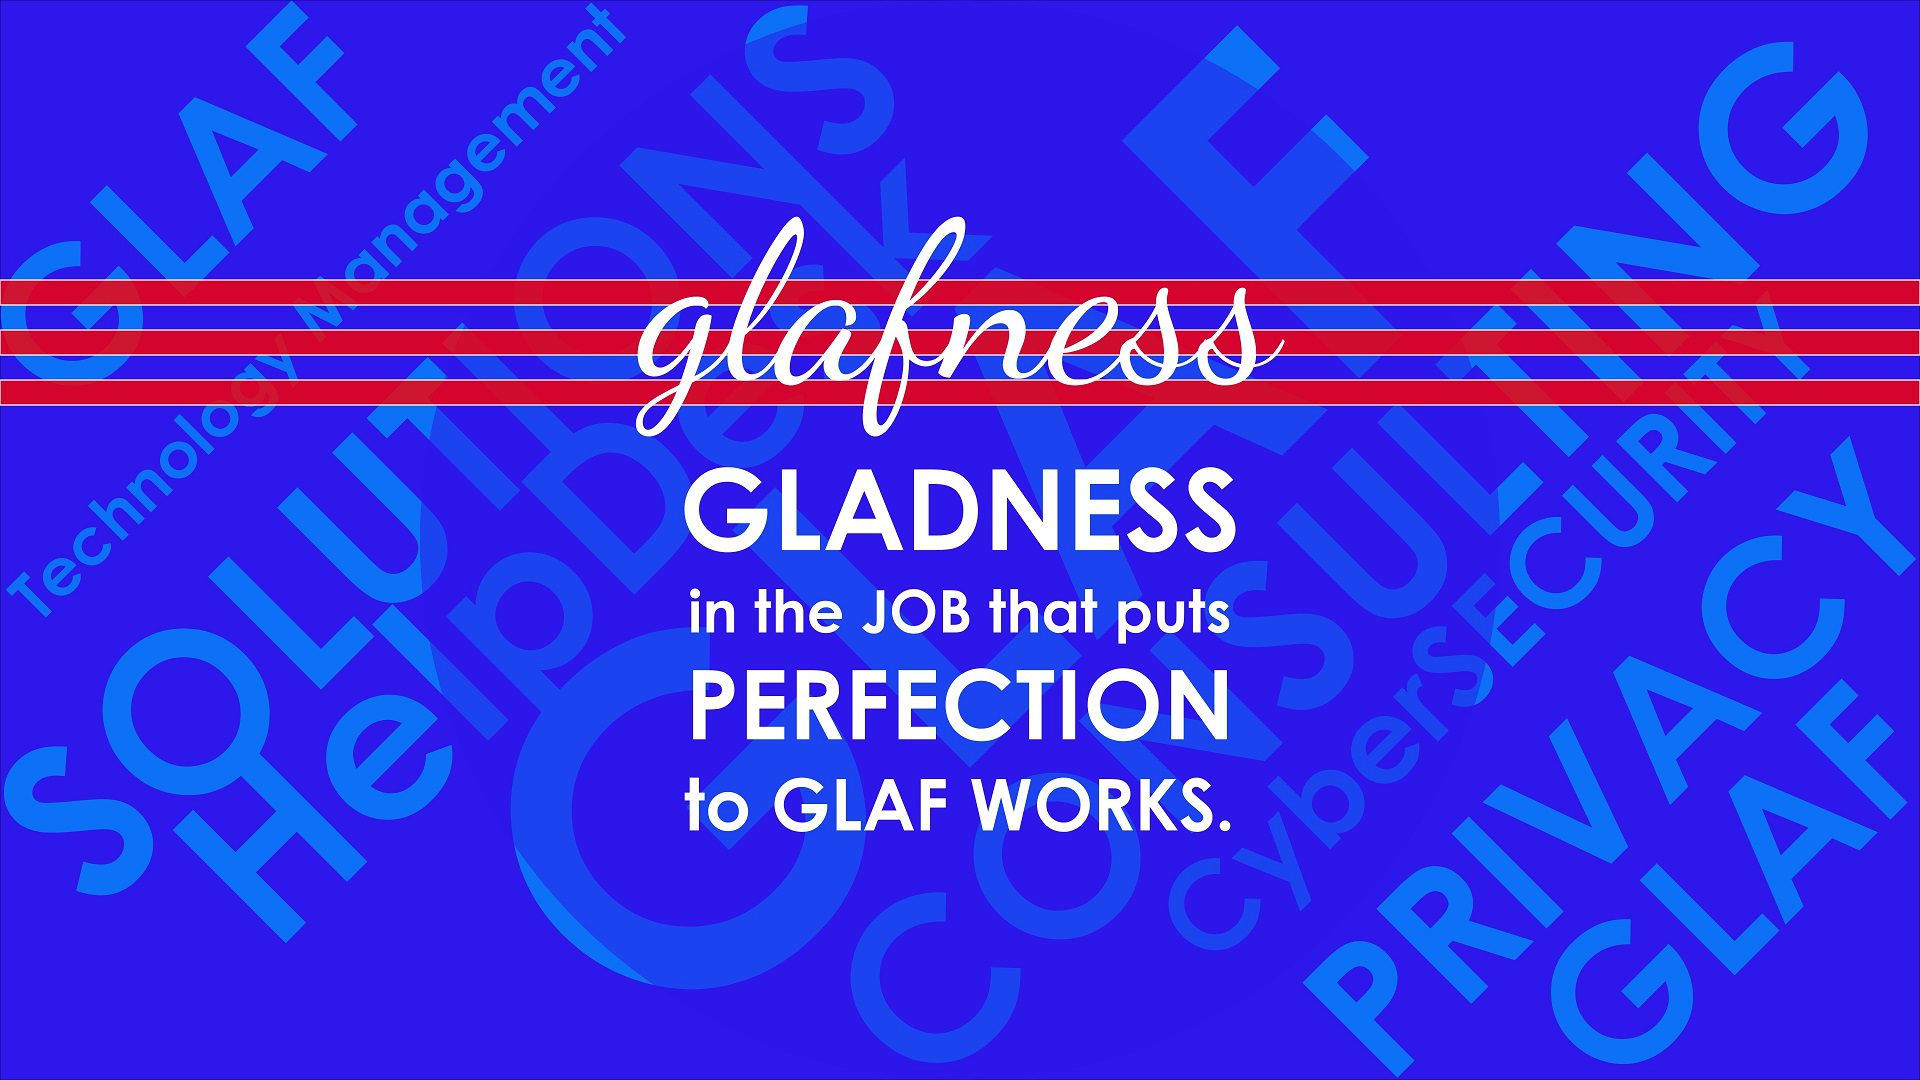 glafness is the attitude that inspires, enchant, and aims to exceed every expectation.